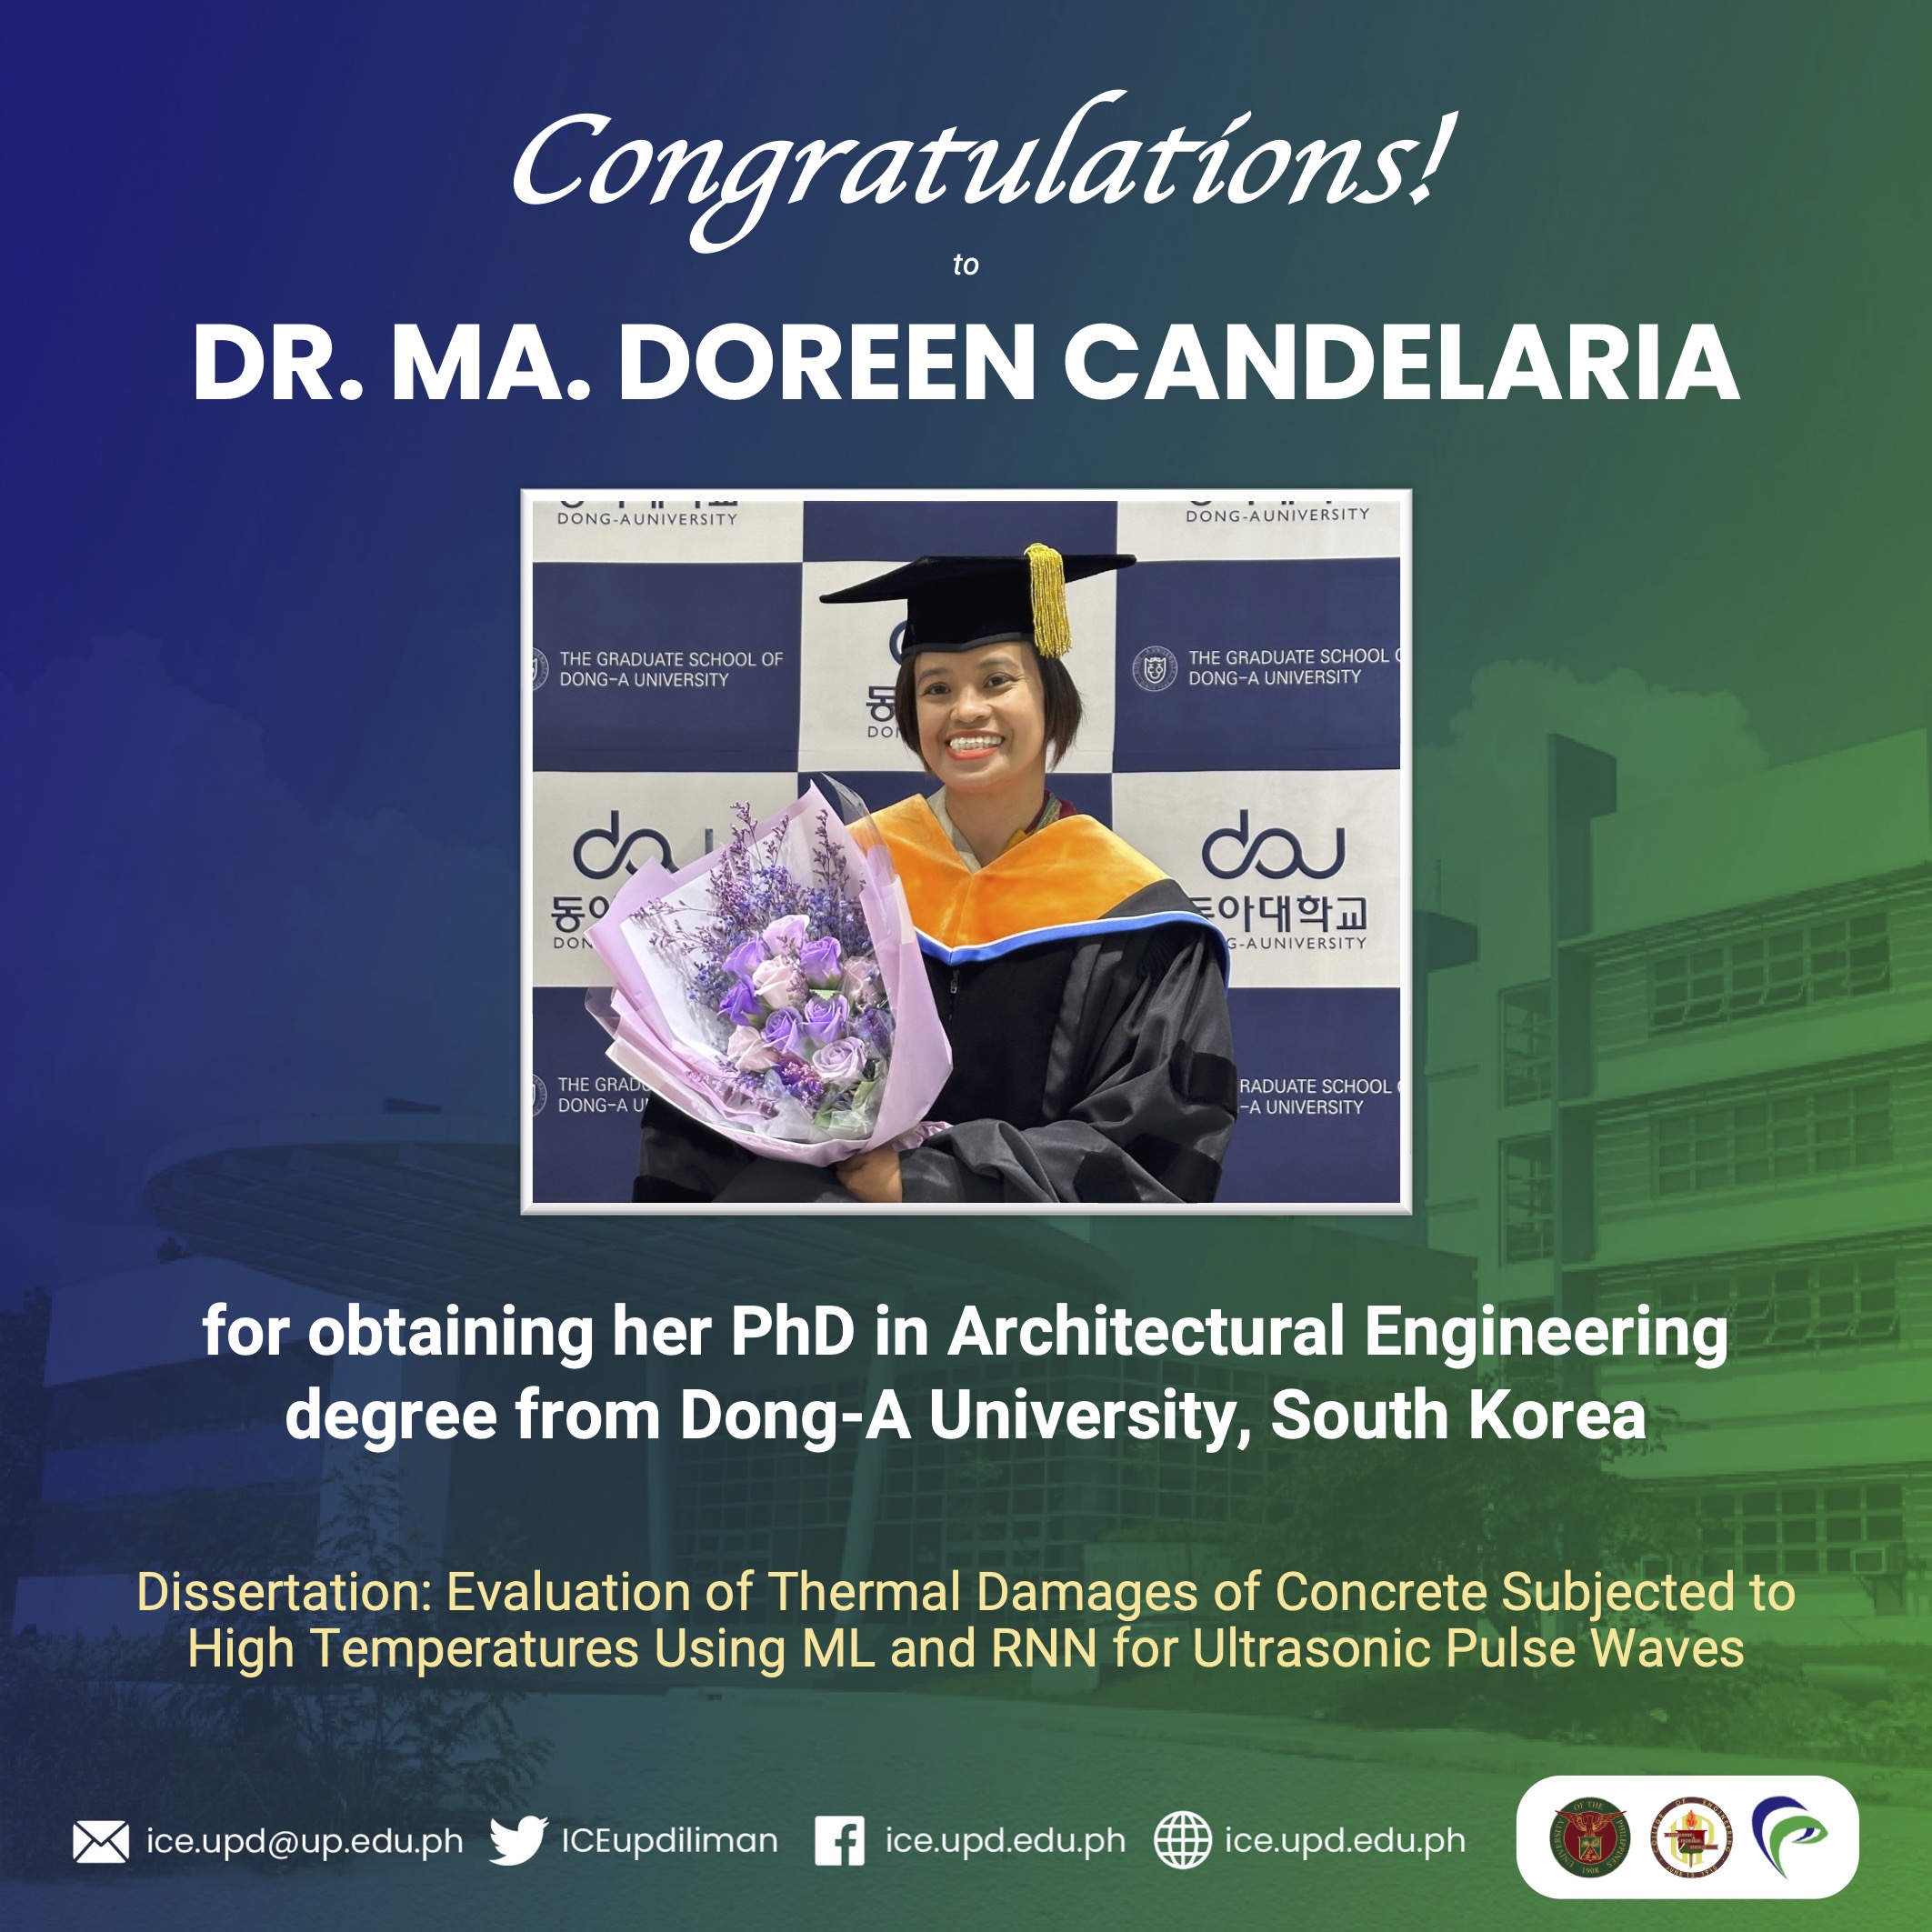 Asst. Prof. Candelaria obtains PhD degree from Dong-A University